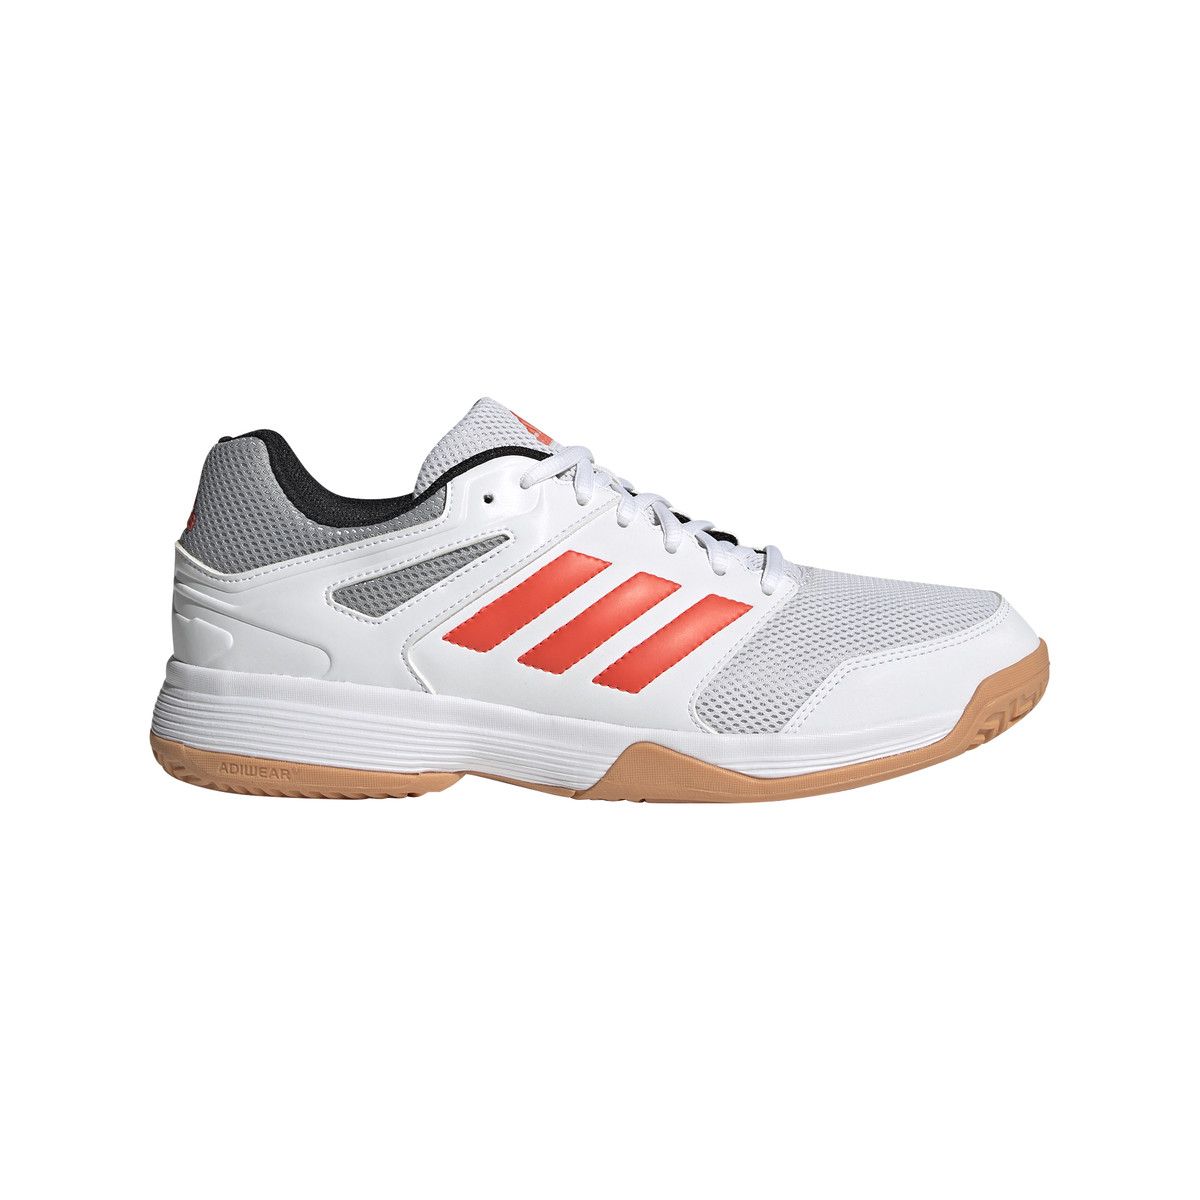 adidas Sppedcourt Men's Volleyball Shoes FZ4682